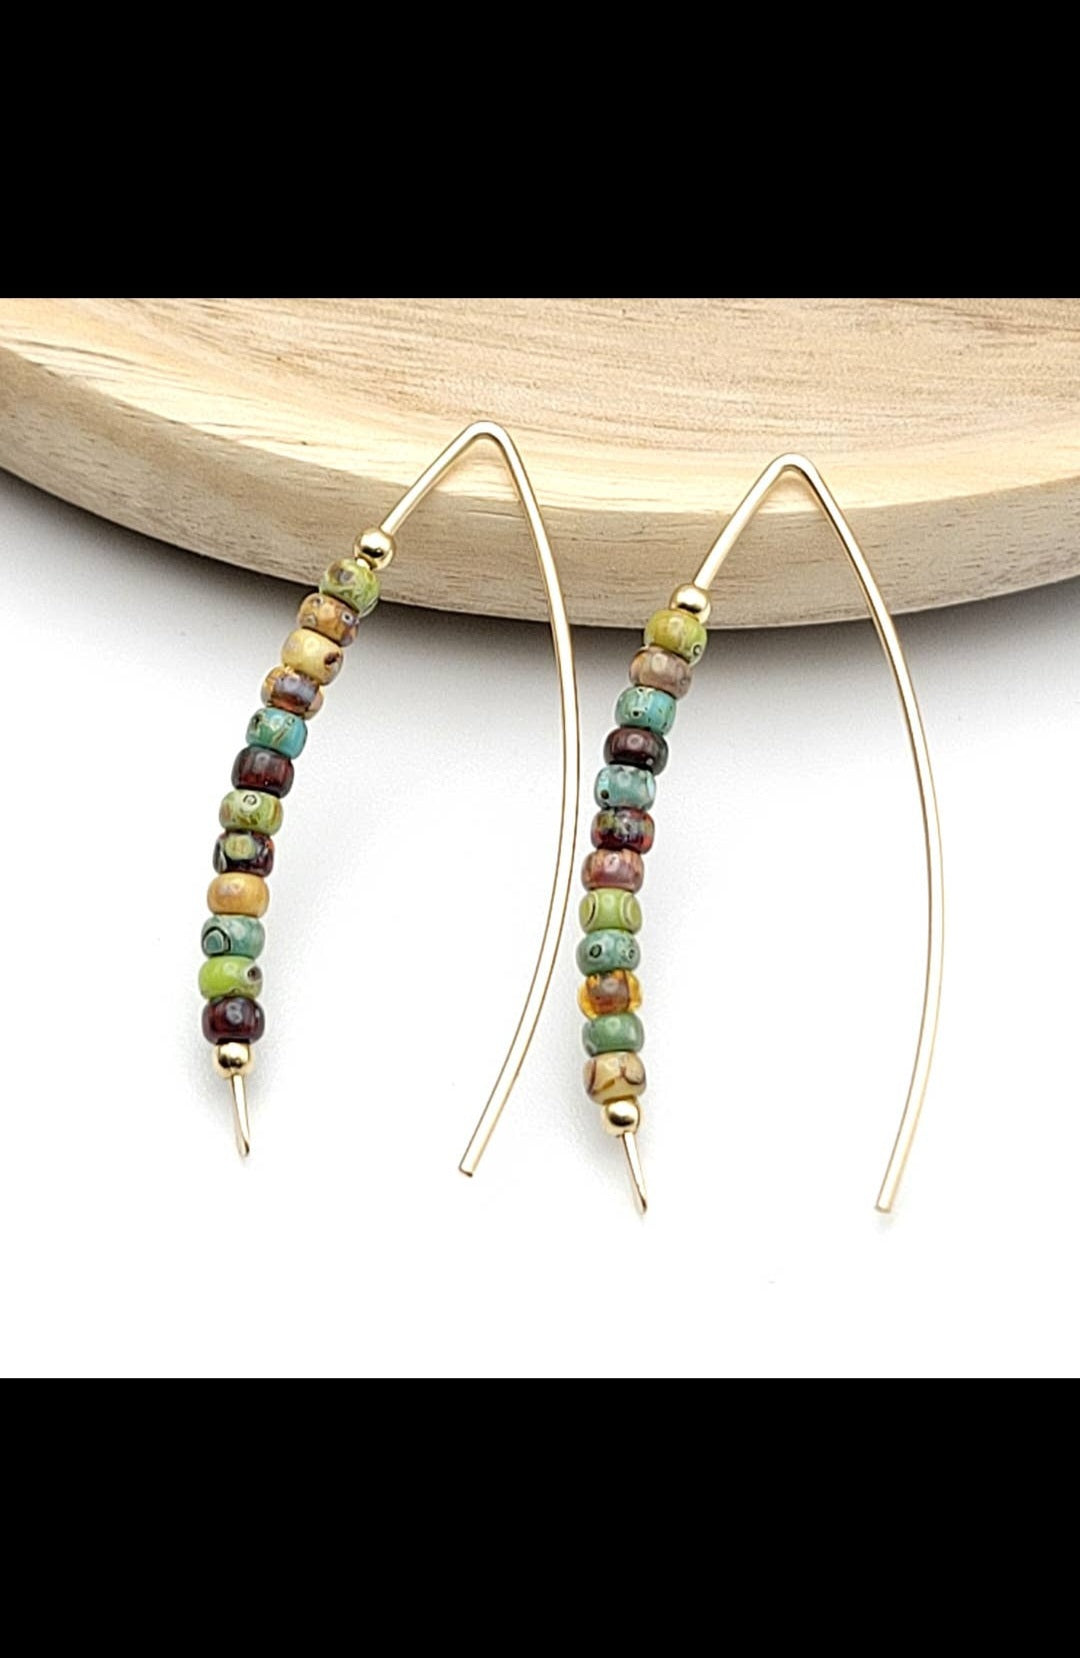 14k Gold Filled and Colorful Beaded Sterling Silver Threader Earrings (Sku8995)